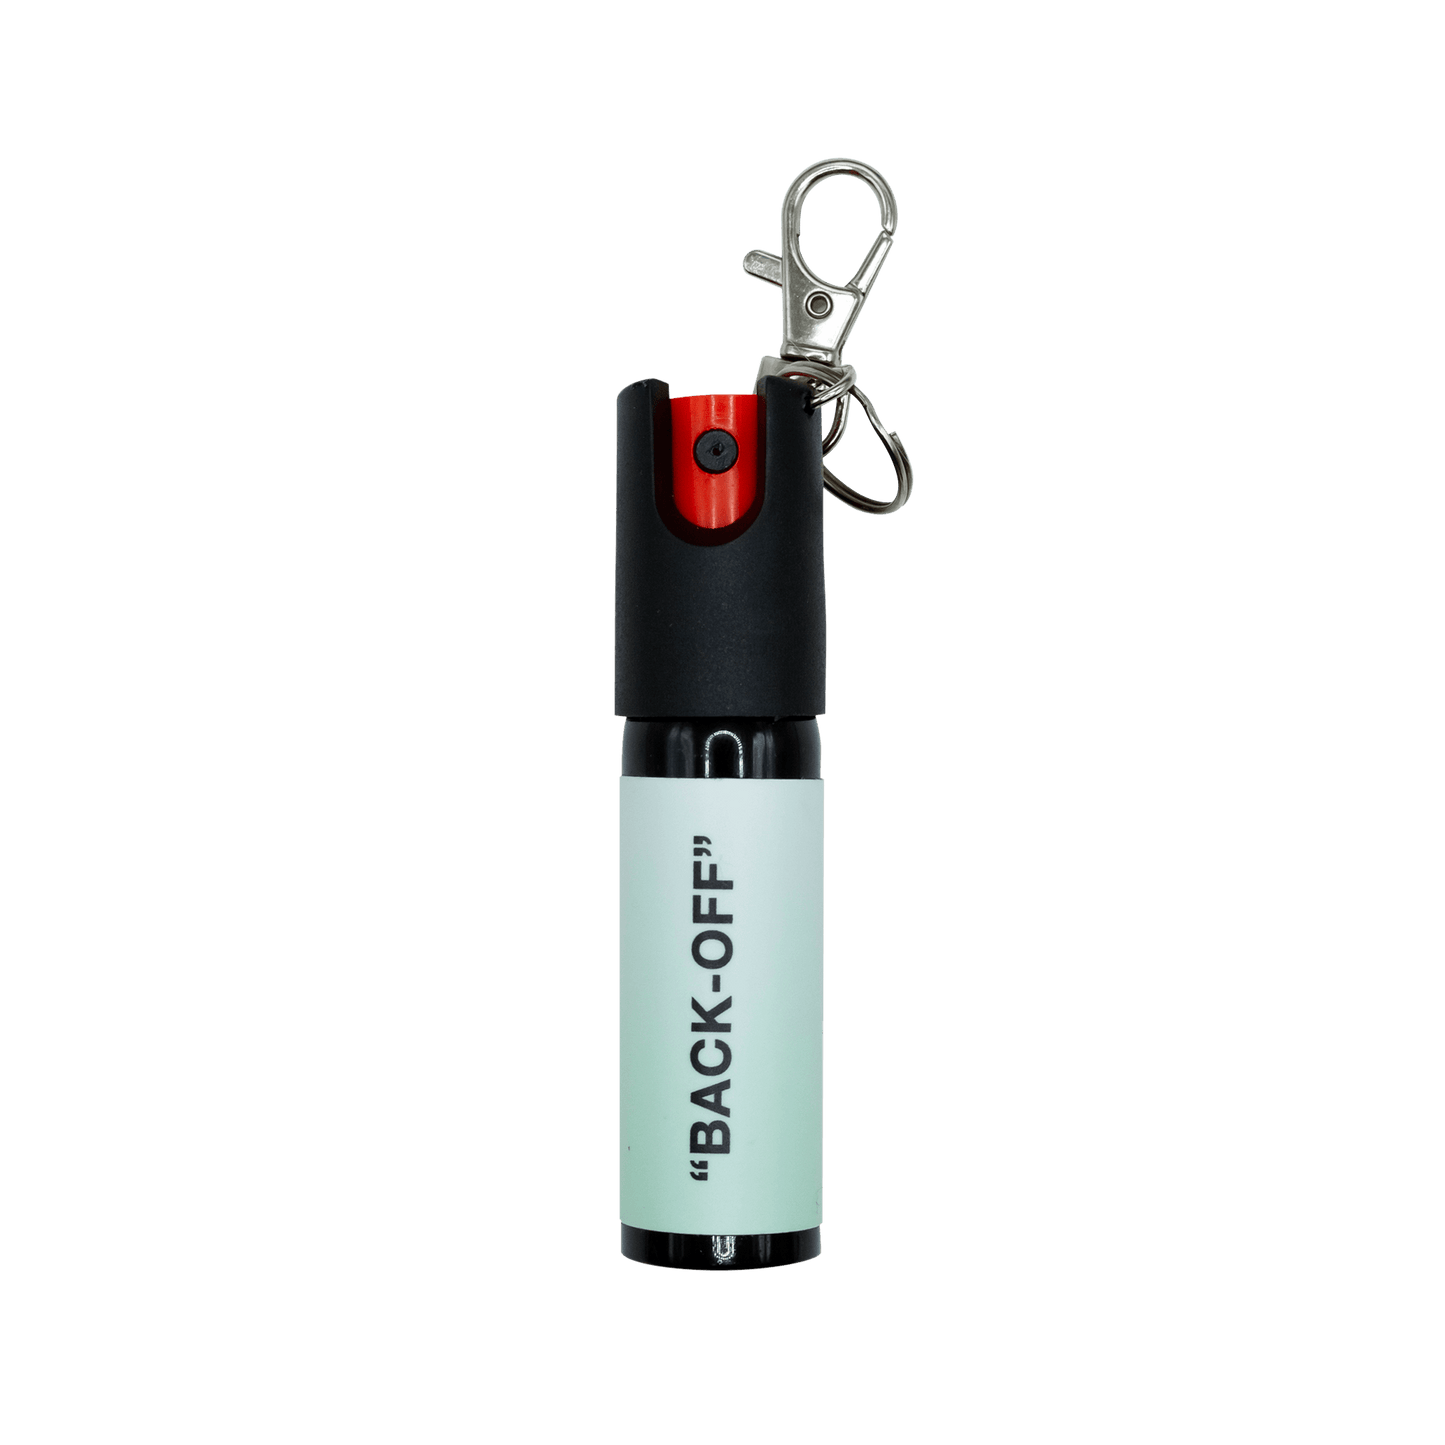 SDK Pepper Spray Blue (20ml compact Pepper Spray with keychain attachment)